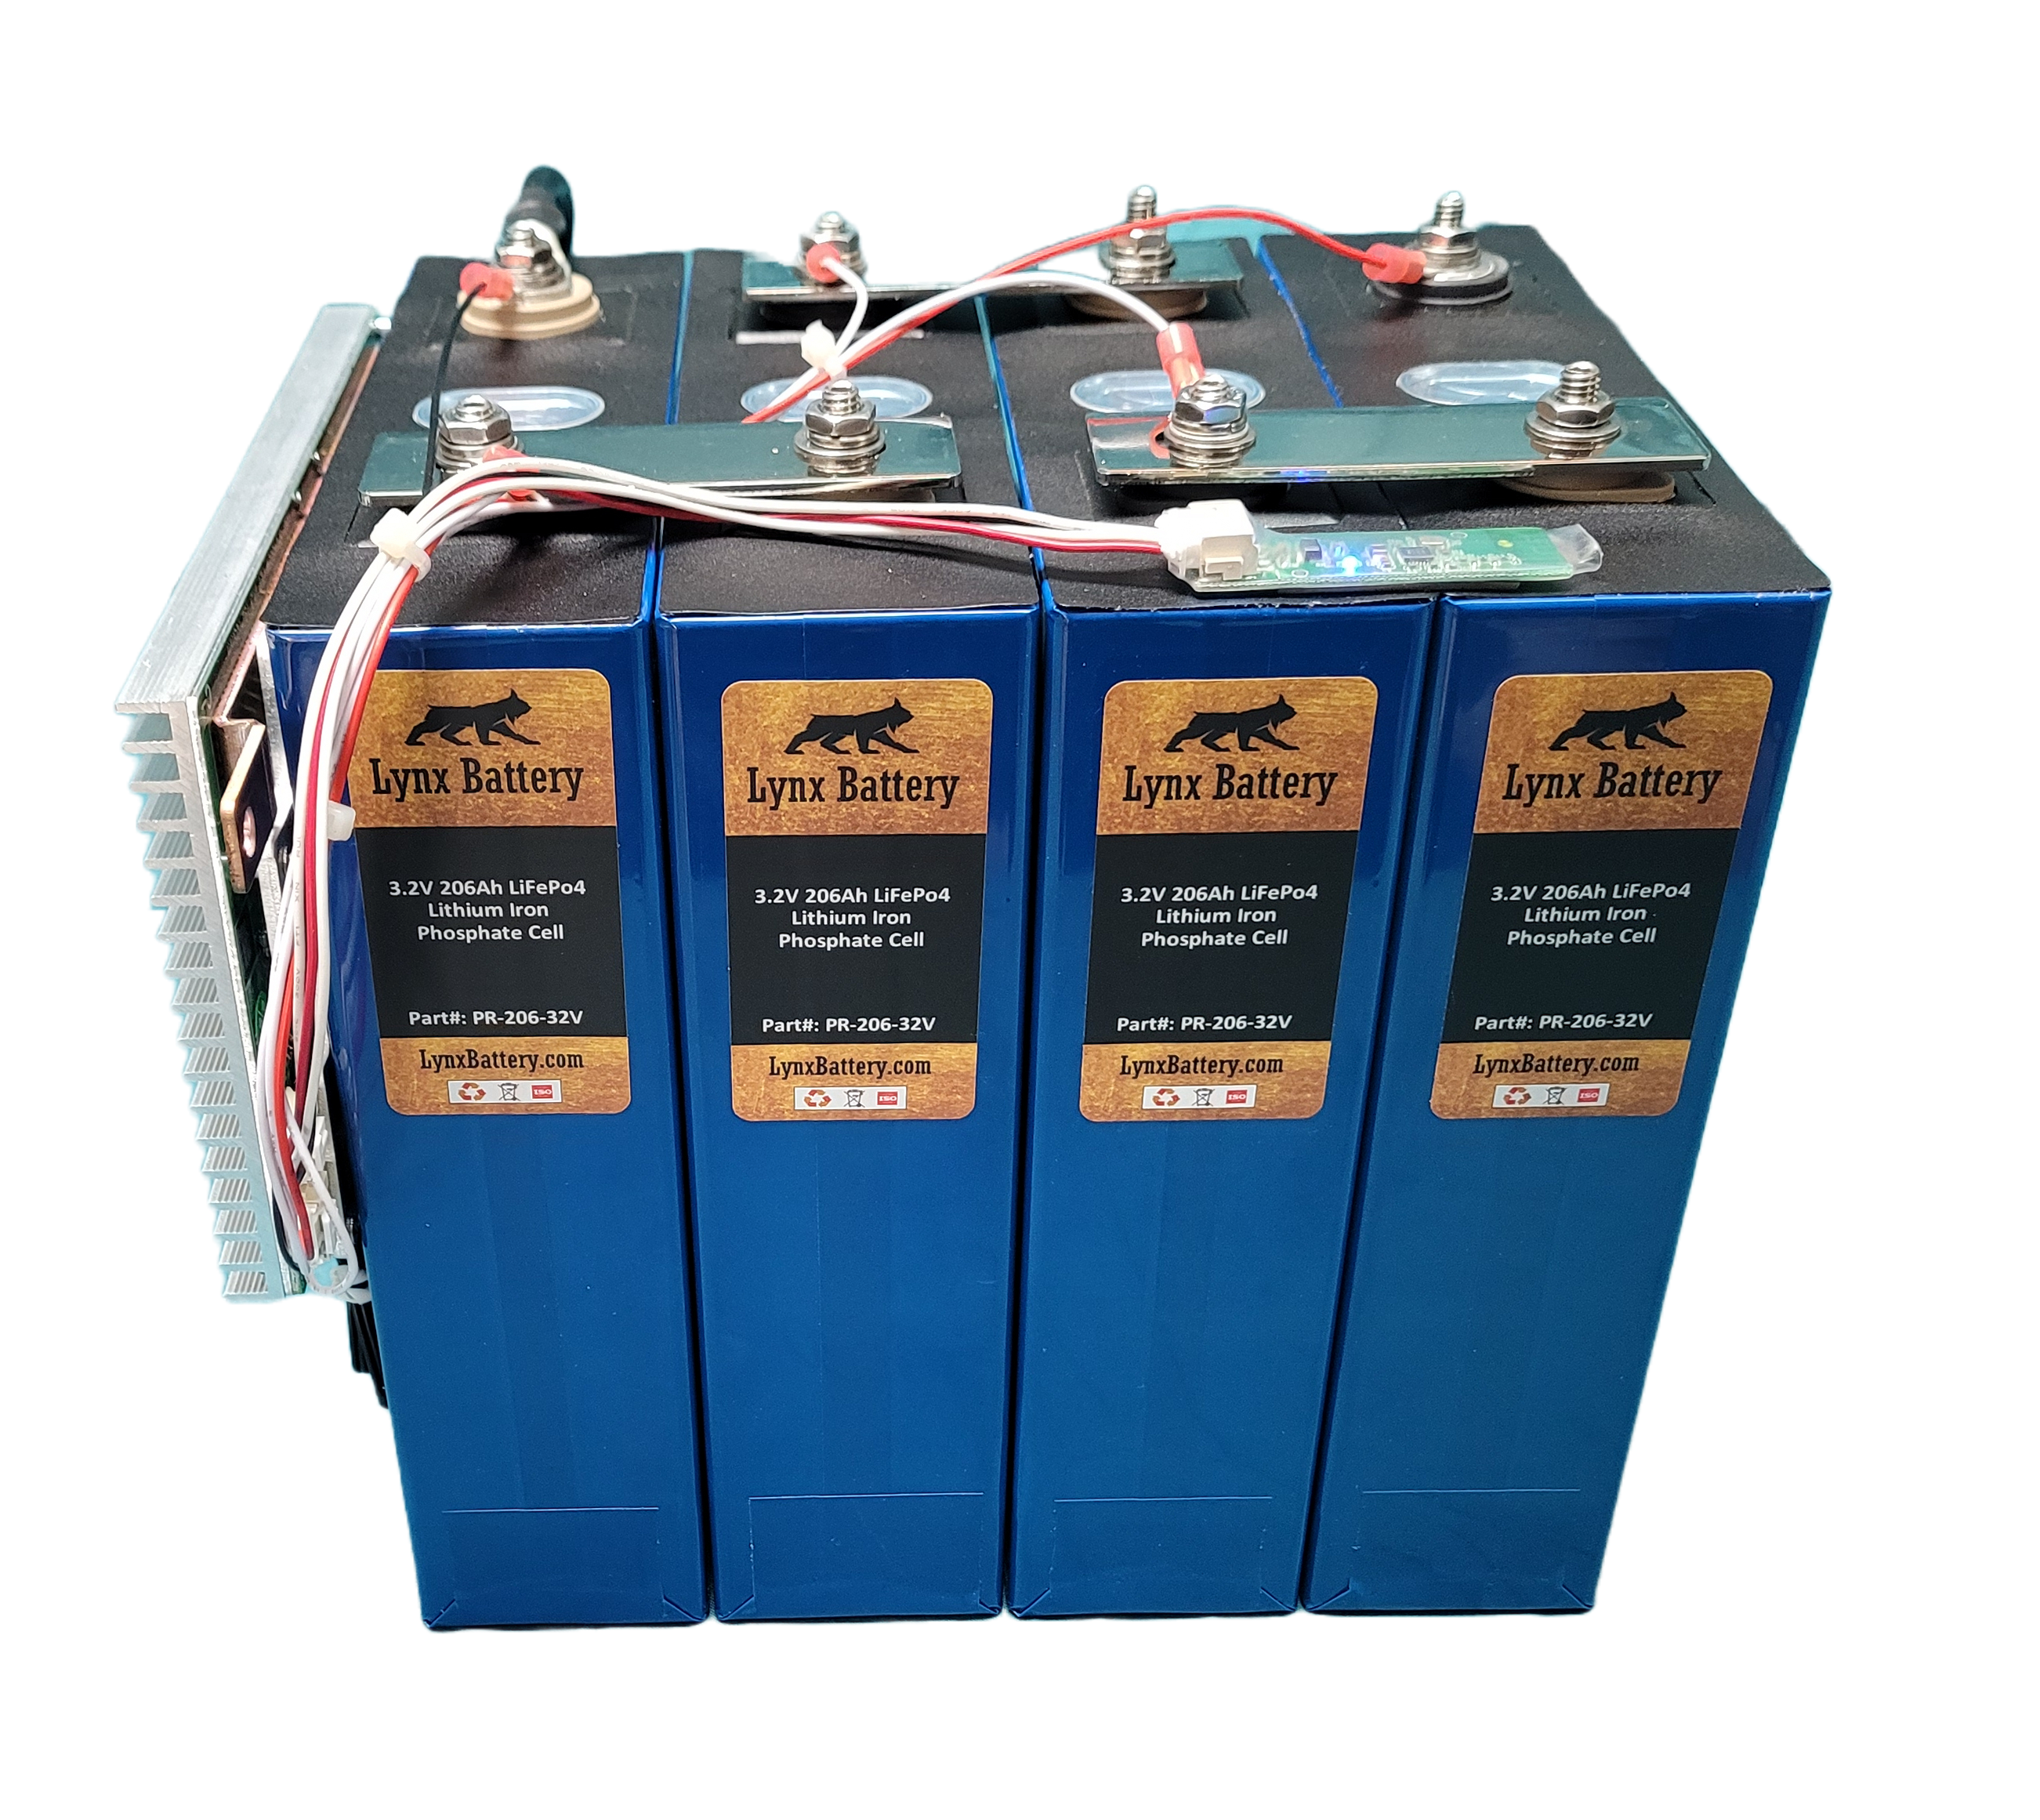 24V 206Ah Lithium Iron Phosphate (LiFePO4) Prismatic Battery with 200A –  Lynx Battery